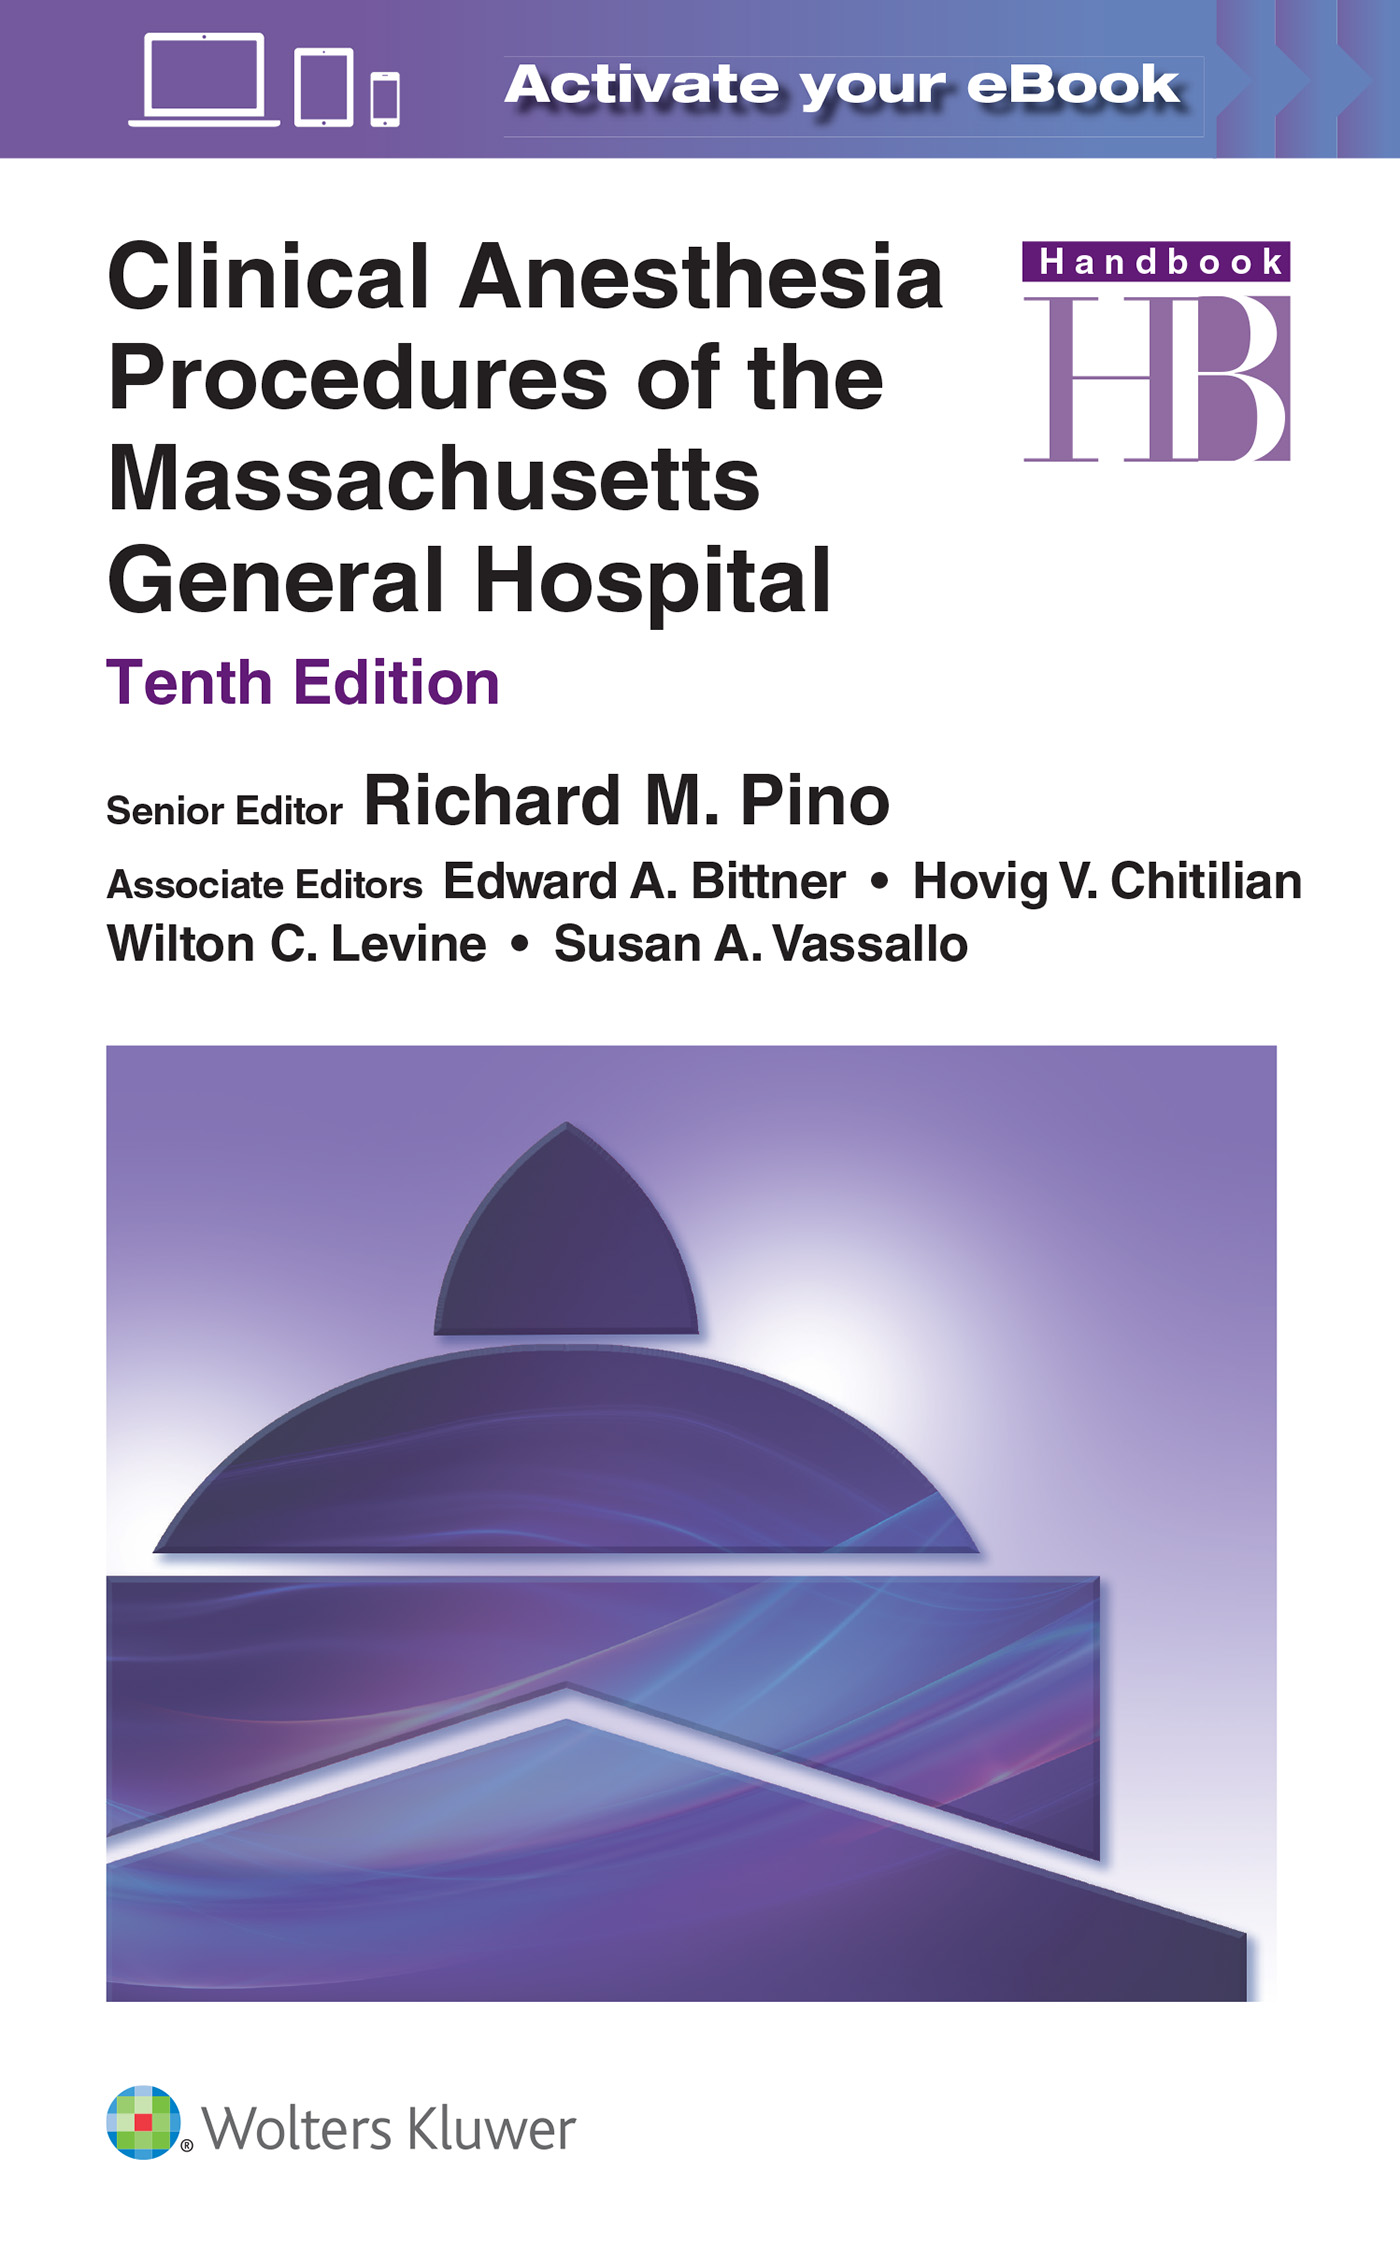 Clinical Anesthesia Procedures of the MassachusettsGeneral Hospital, 10th ed.